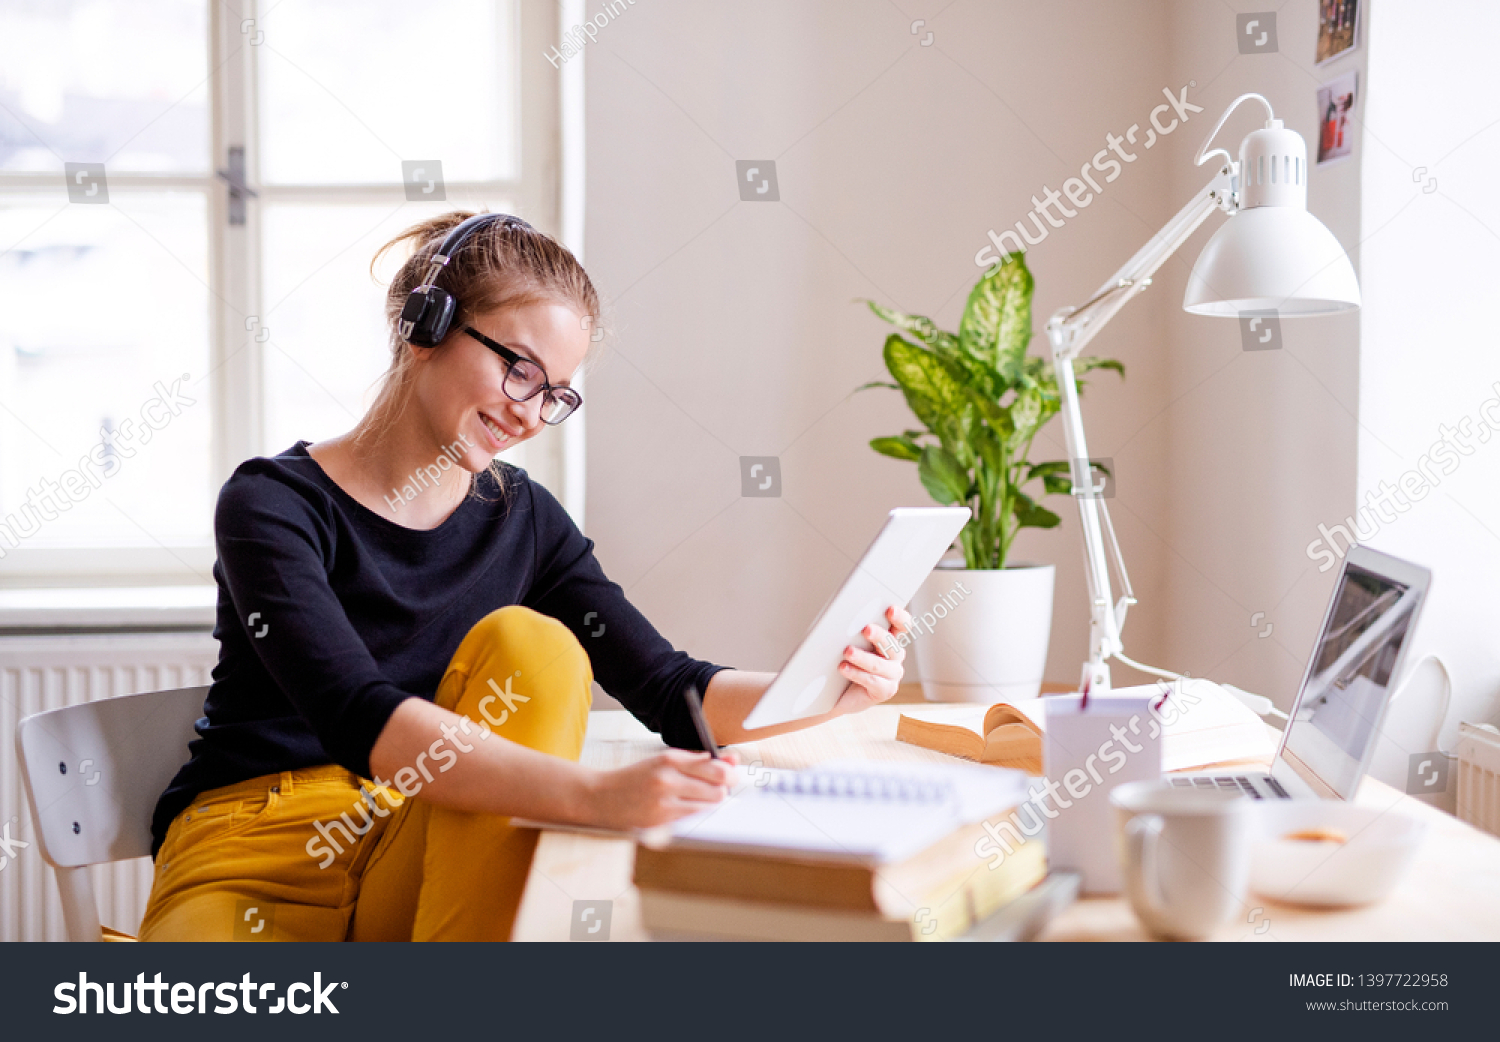 A young female student sitting at the table, using tablet when studying. #1397722958